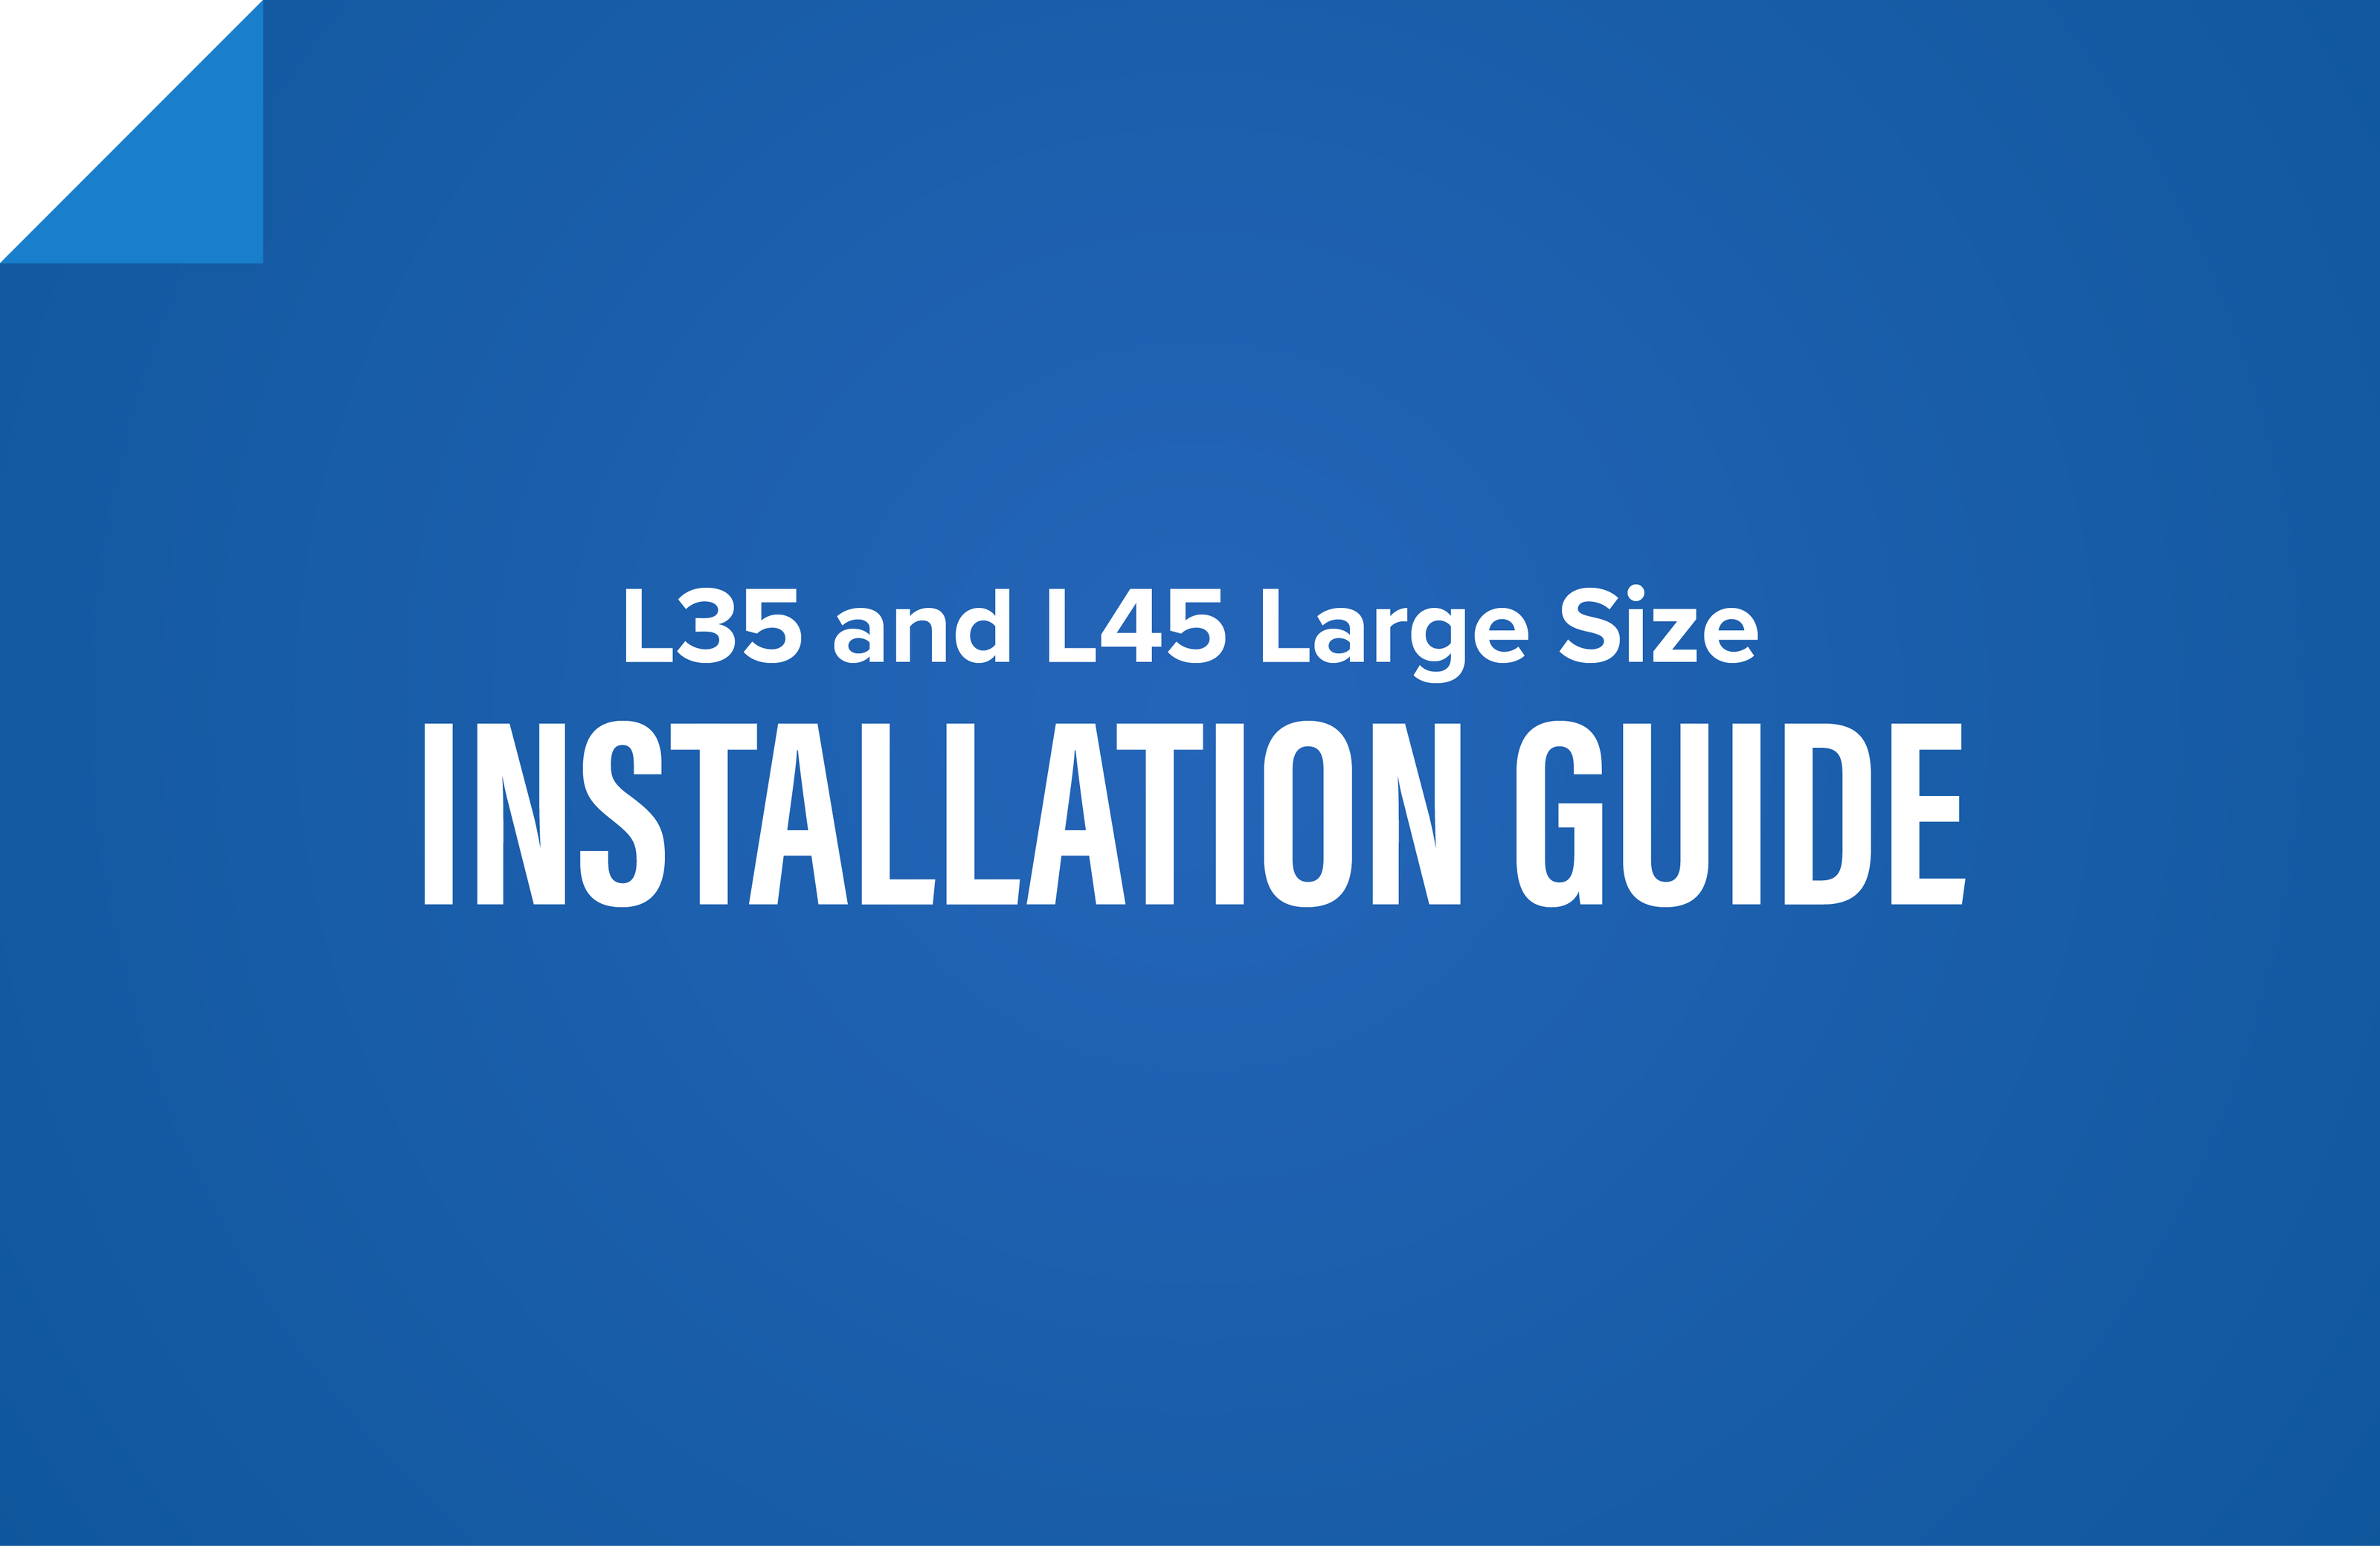 L35 and L45 Large Size - Installation Guide